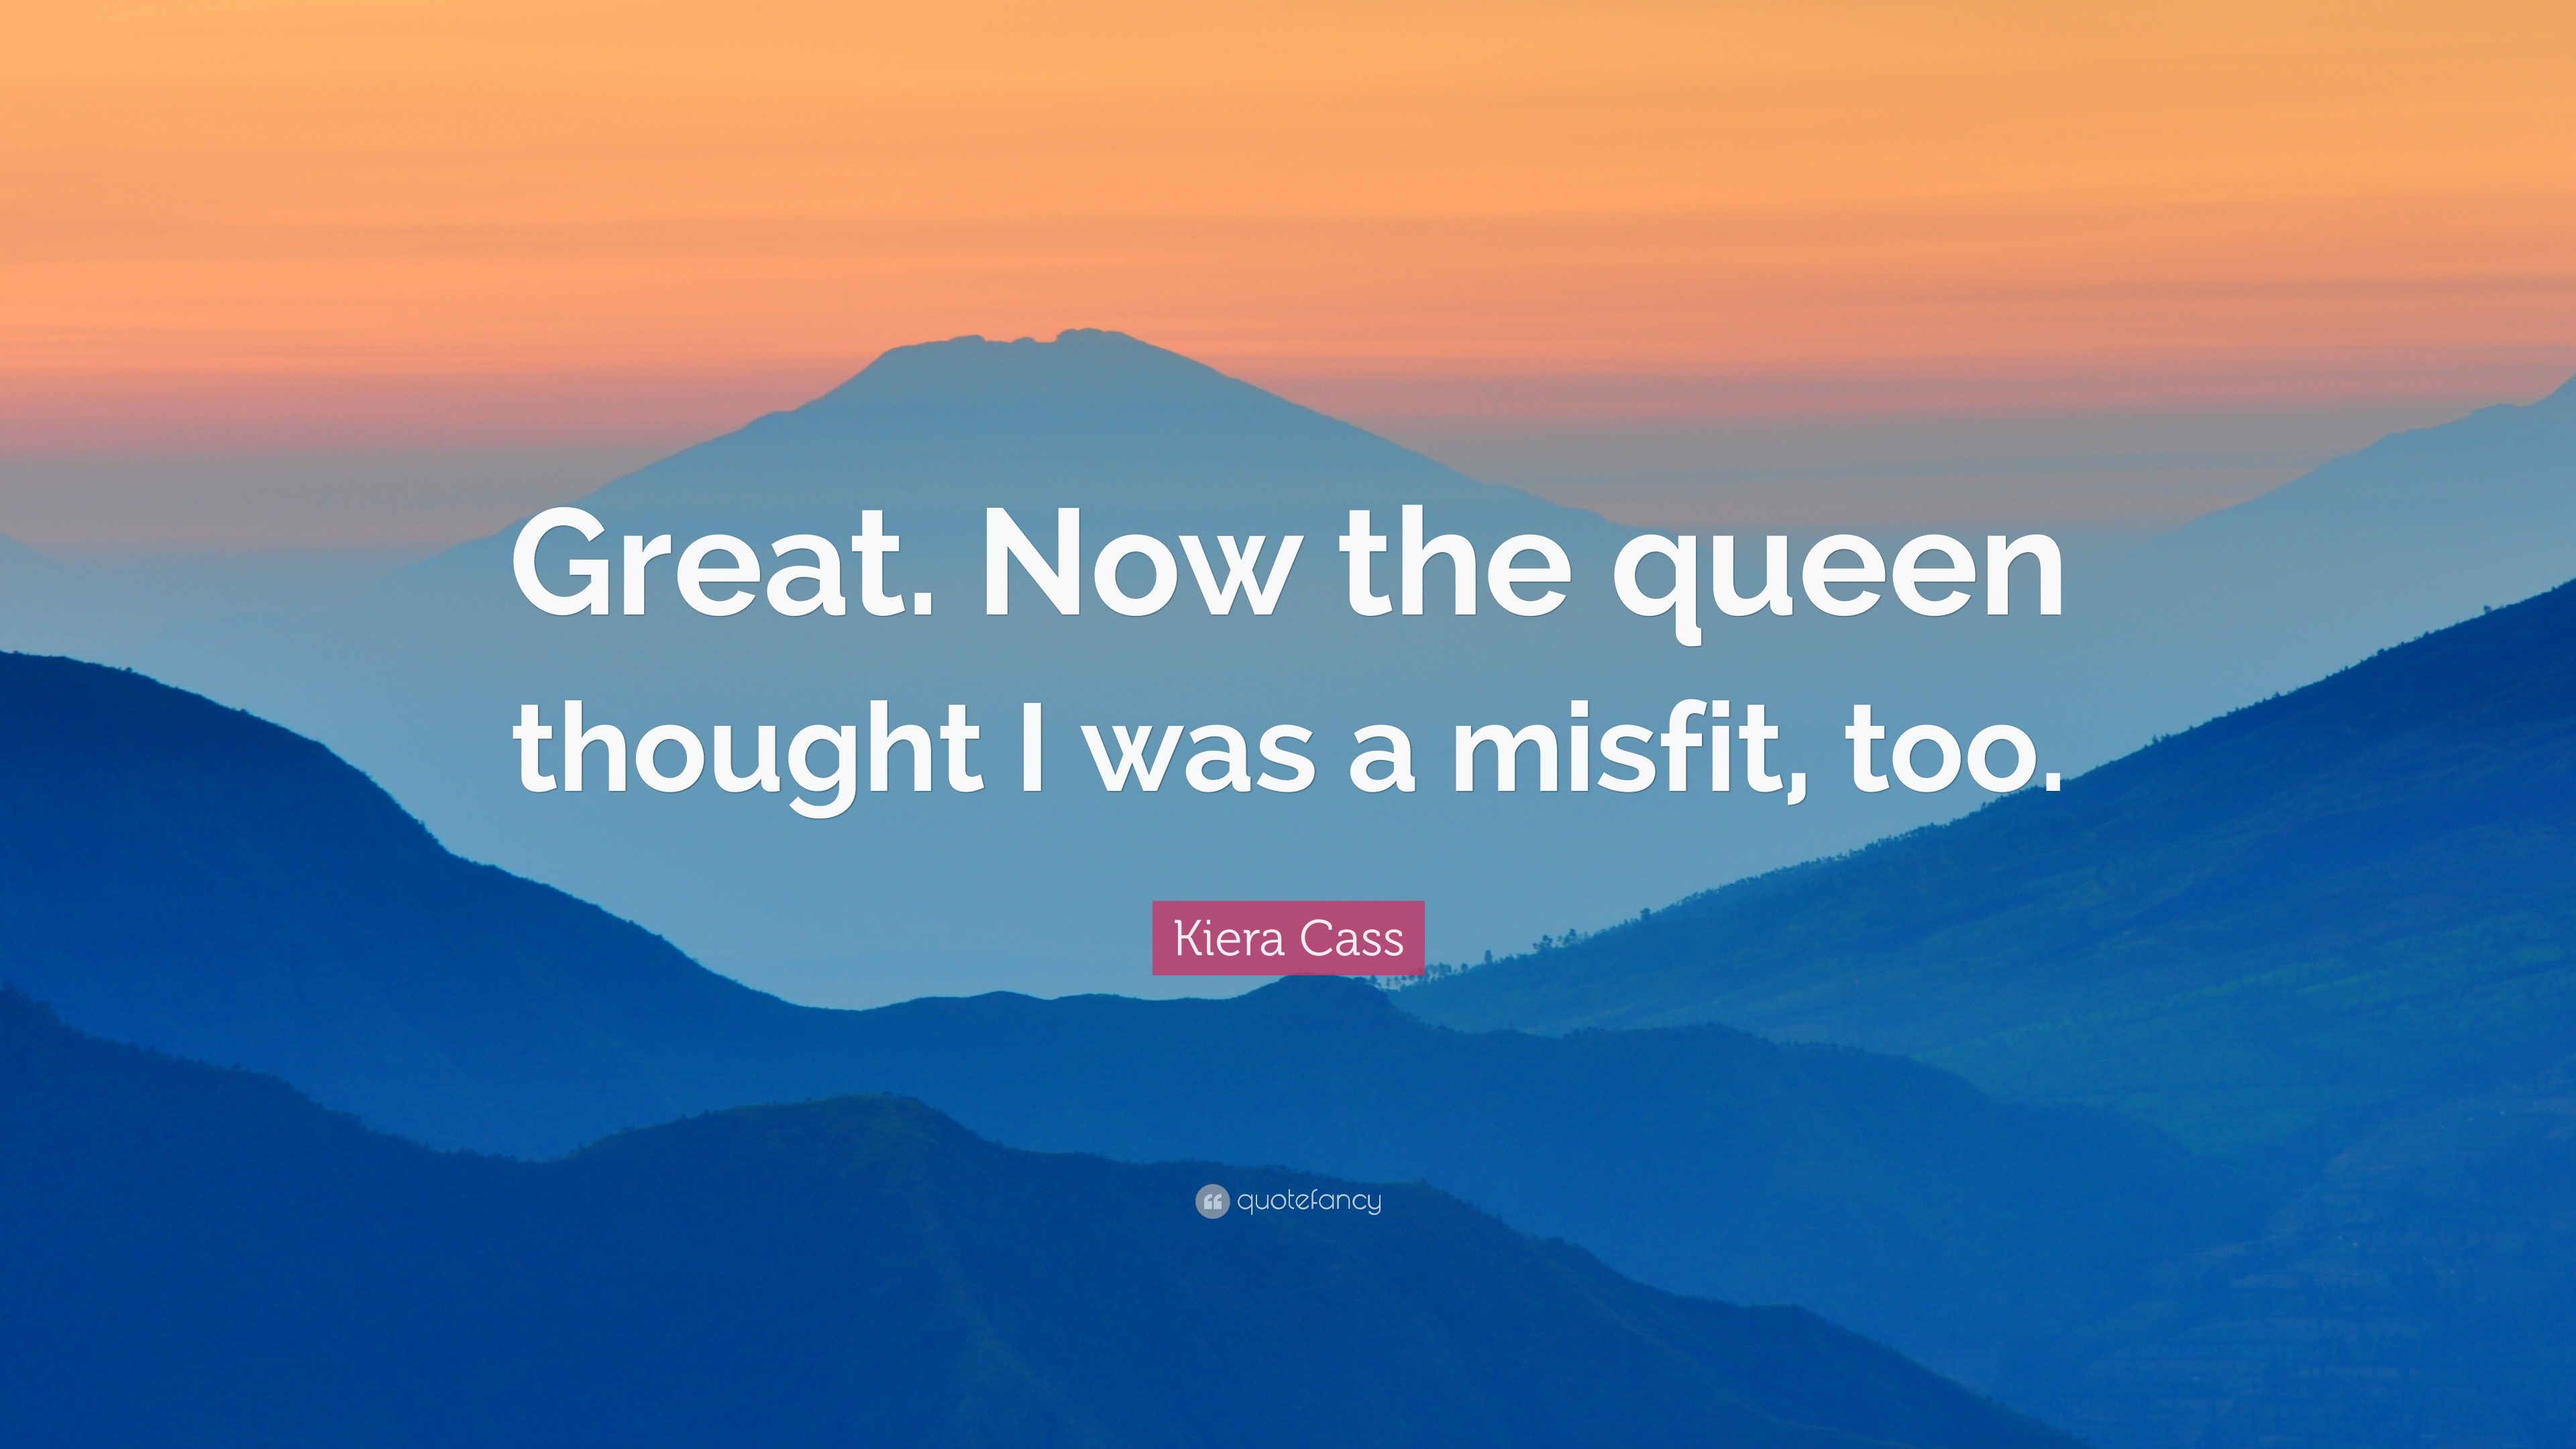 Kiera Cass Quote: “Great. Now the queen thought I was a misfit, too.”